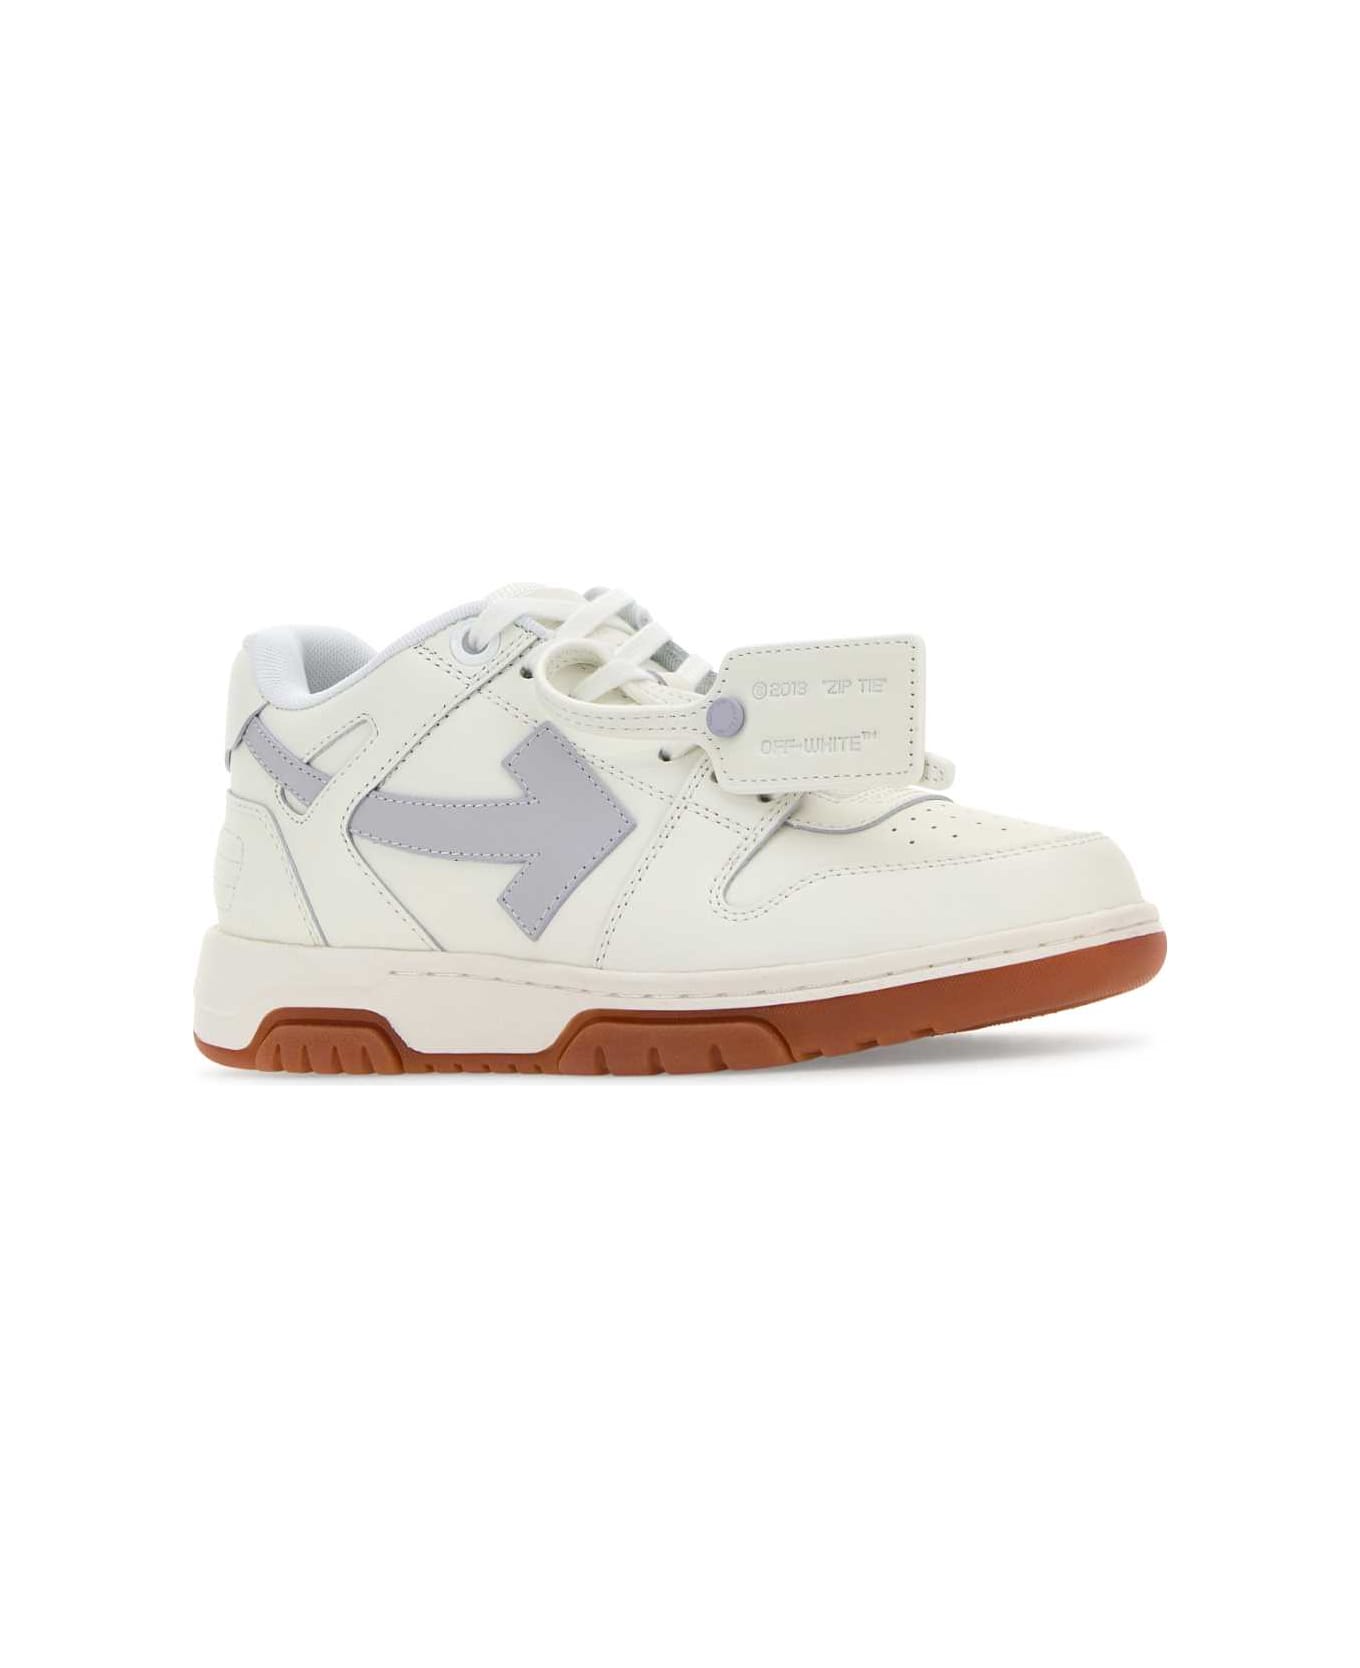 Off-White Two-tone Leather Out Of Office Sneakers - WHITELIGH